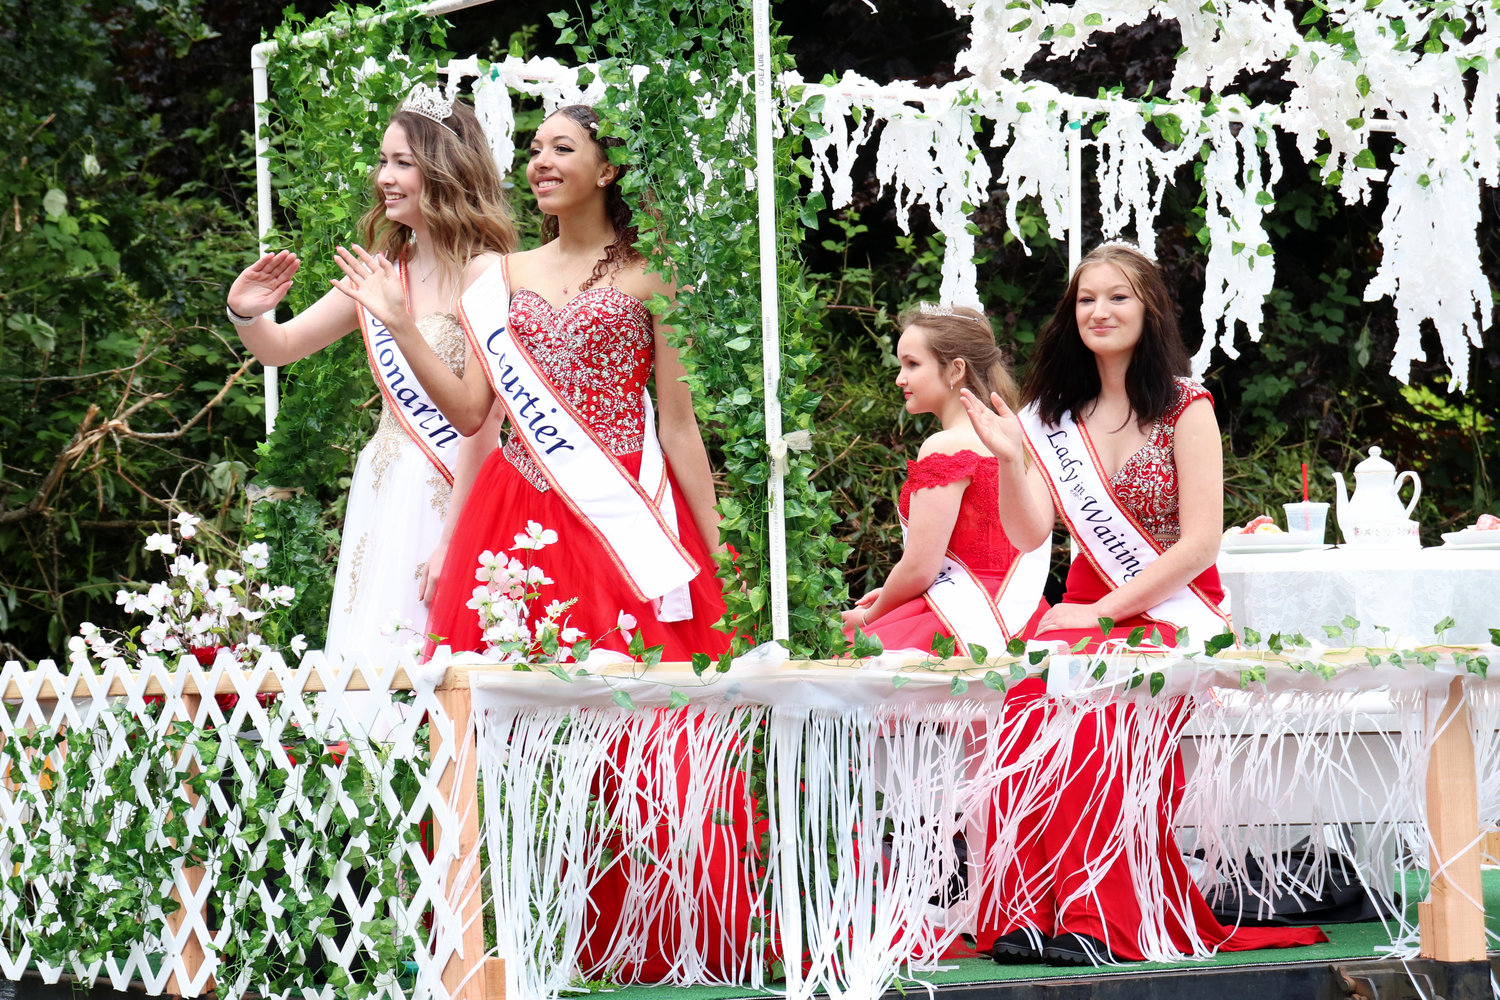 Members of the Oakville Independence Day Royalty Court wave from a float in the Swede Day Parade in Rochester on Saturday.